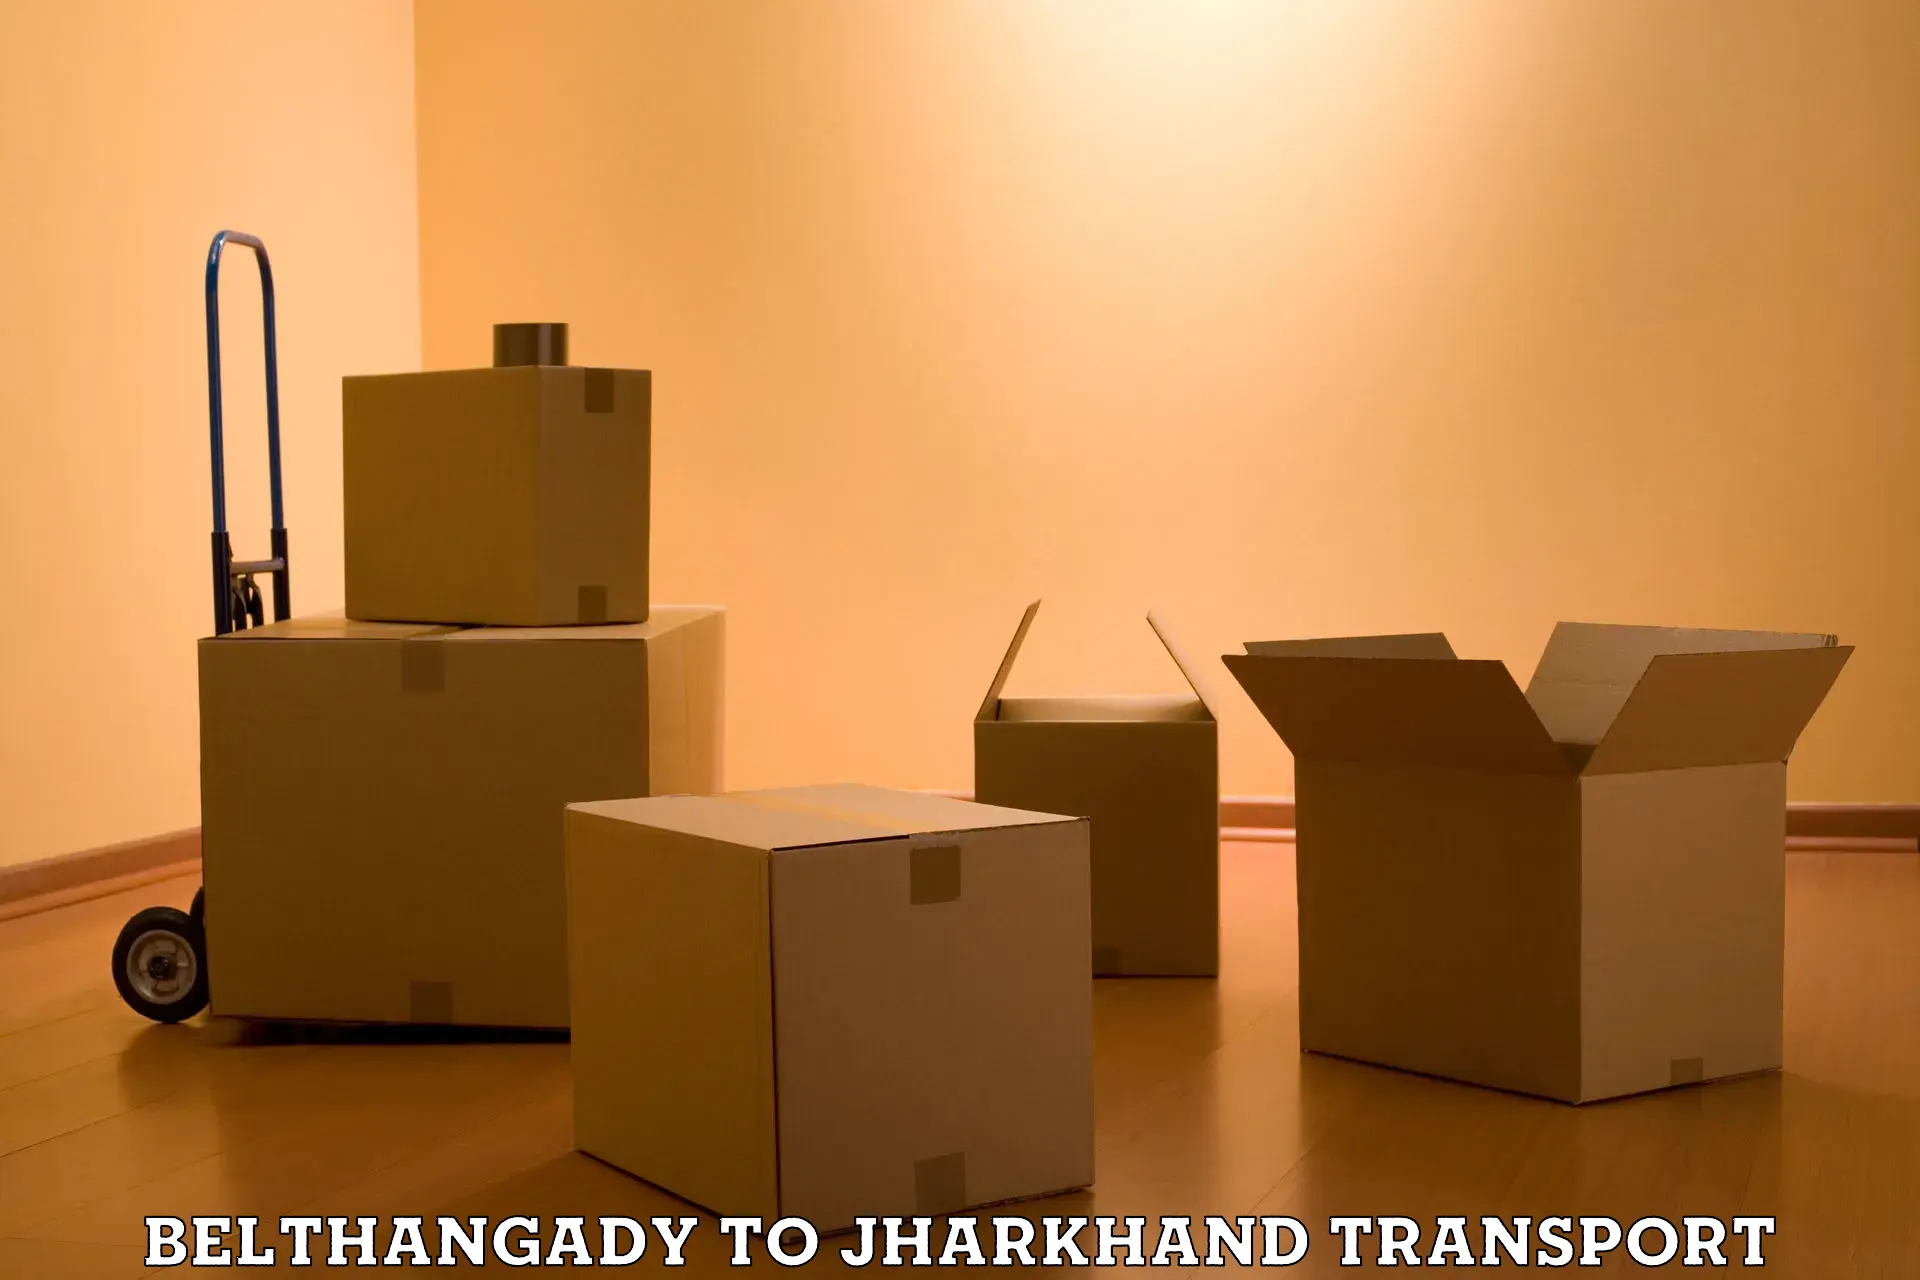 Container transport service Belthangady to Bokaro